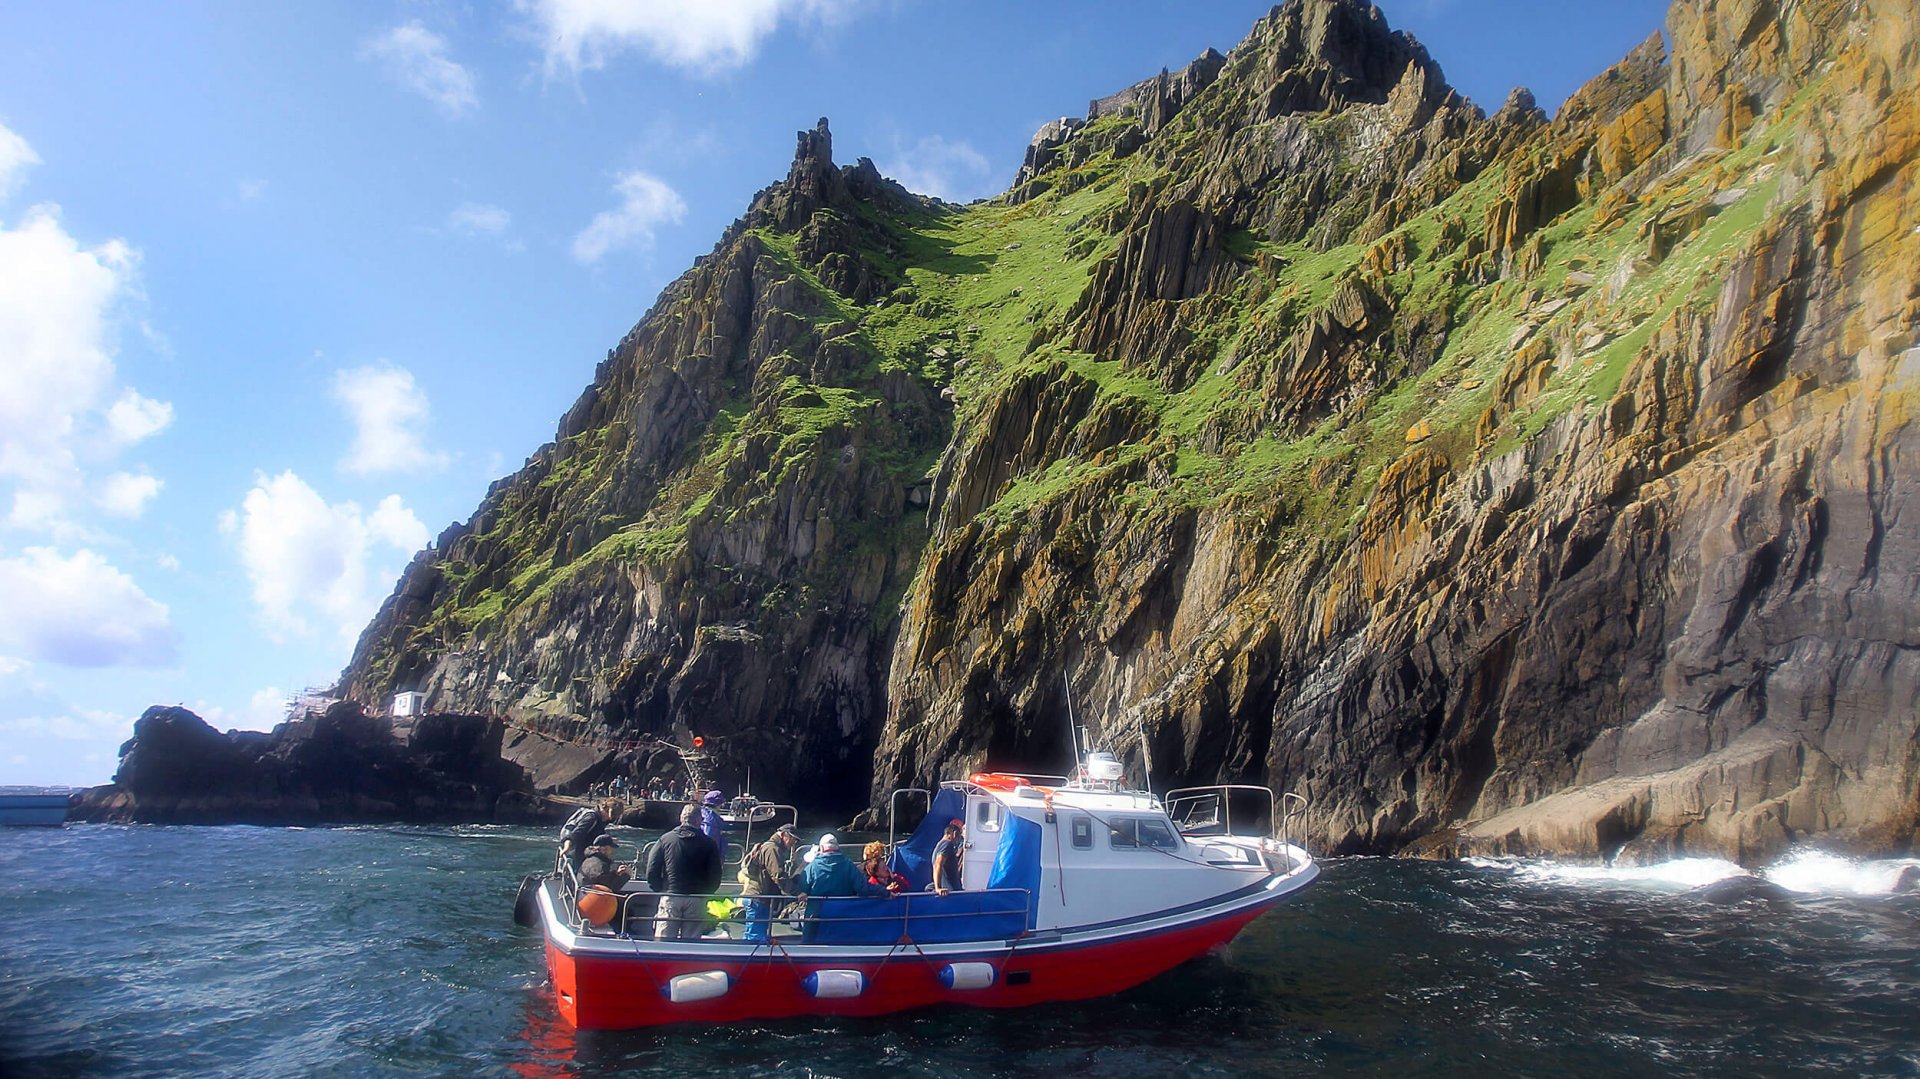 Boat in the sea with tour guests aboard off Skellig Michael Island in Ireland